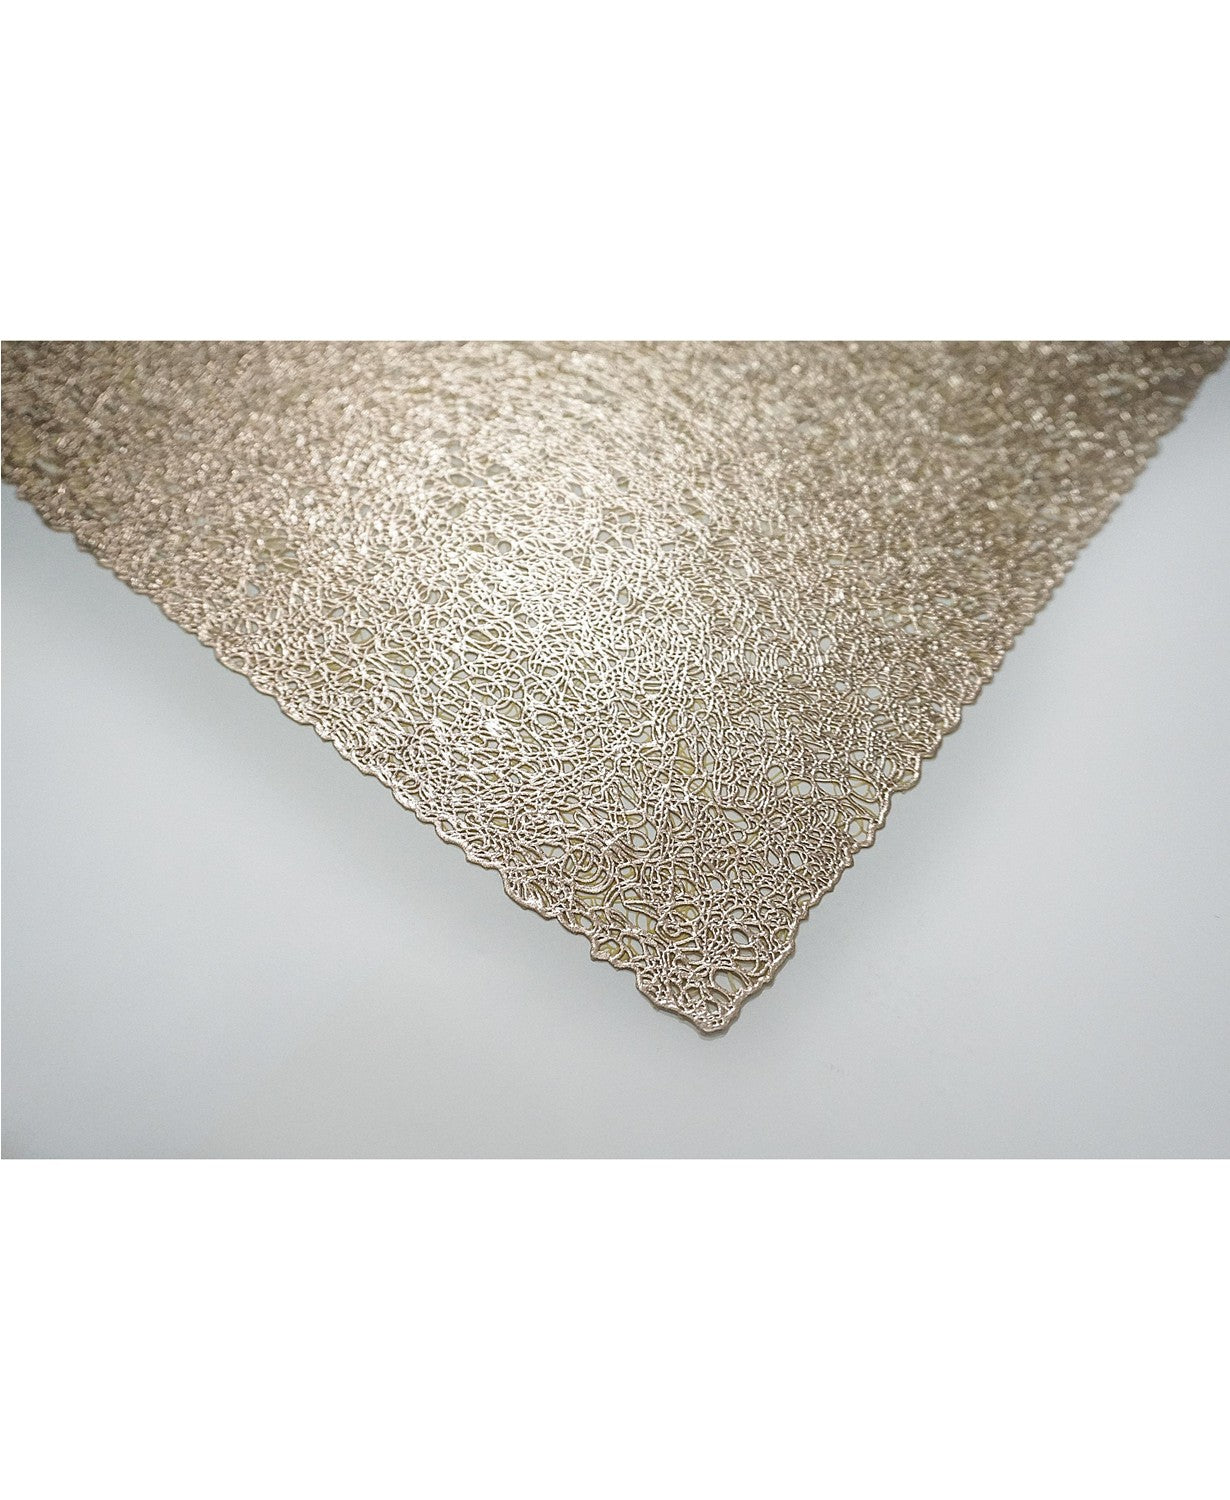 Dainty Home Lacey Woven Metallic Lace Crossweave With Metallic Lace Pattern Reversible 12" x 18" Rectangular Placemats